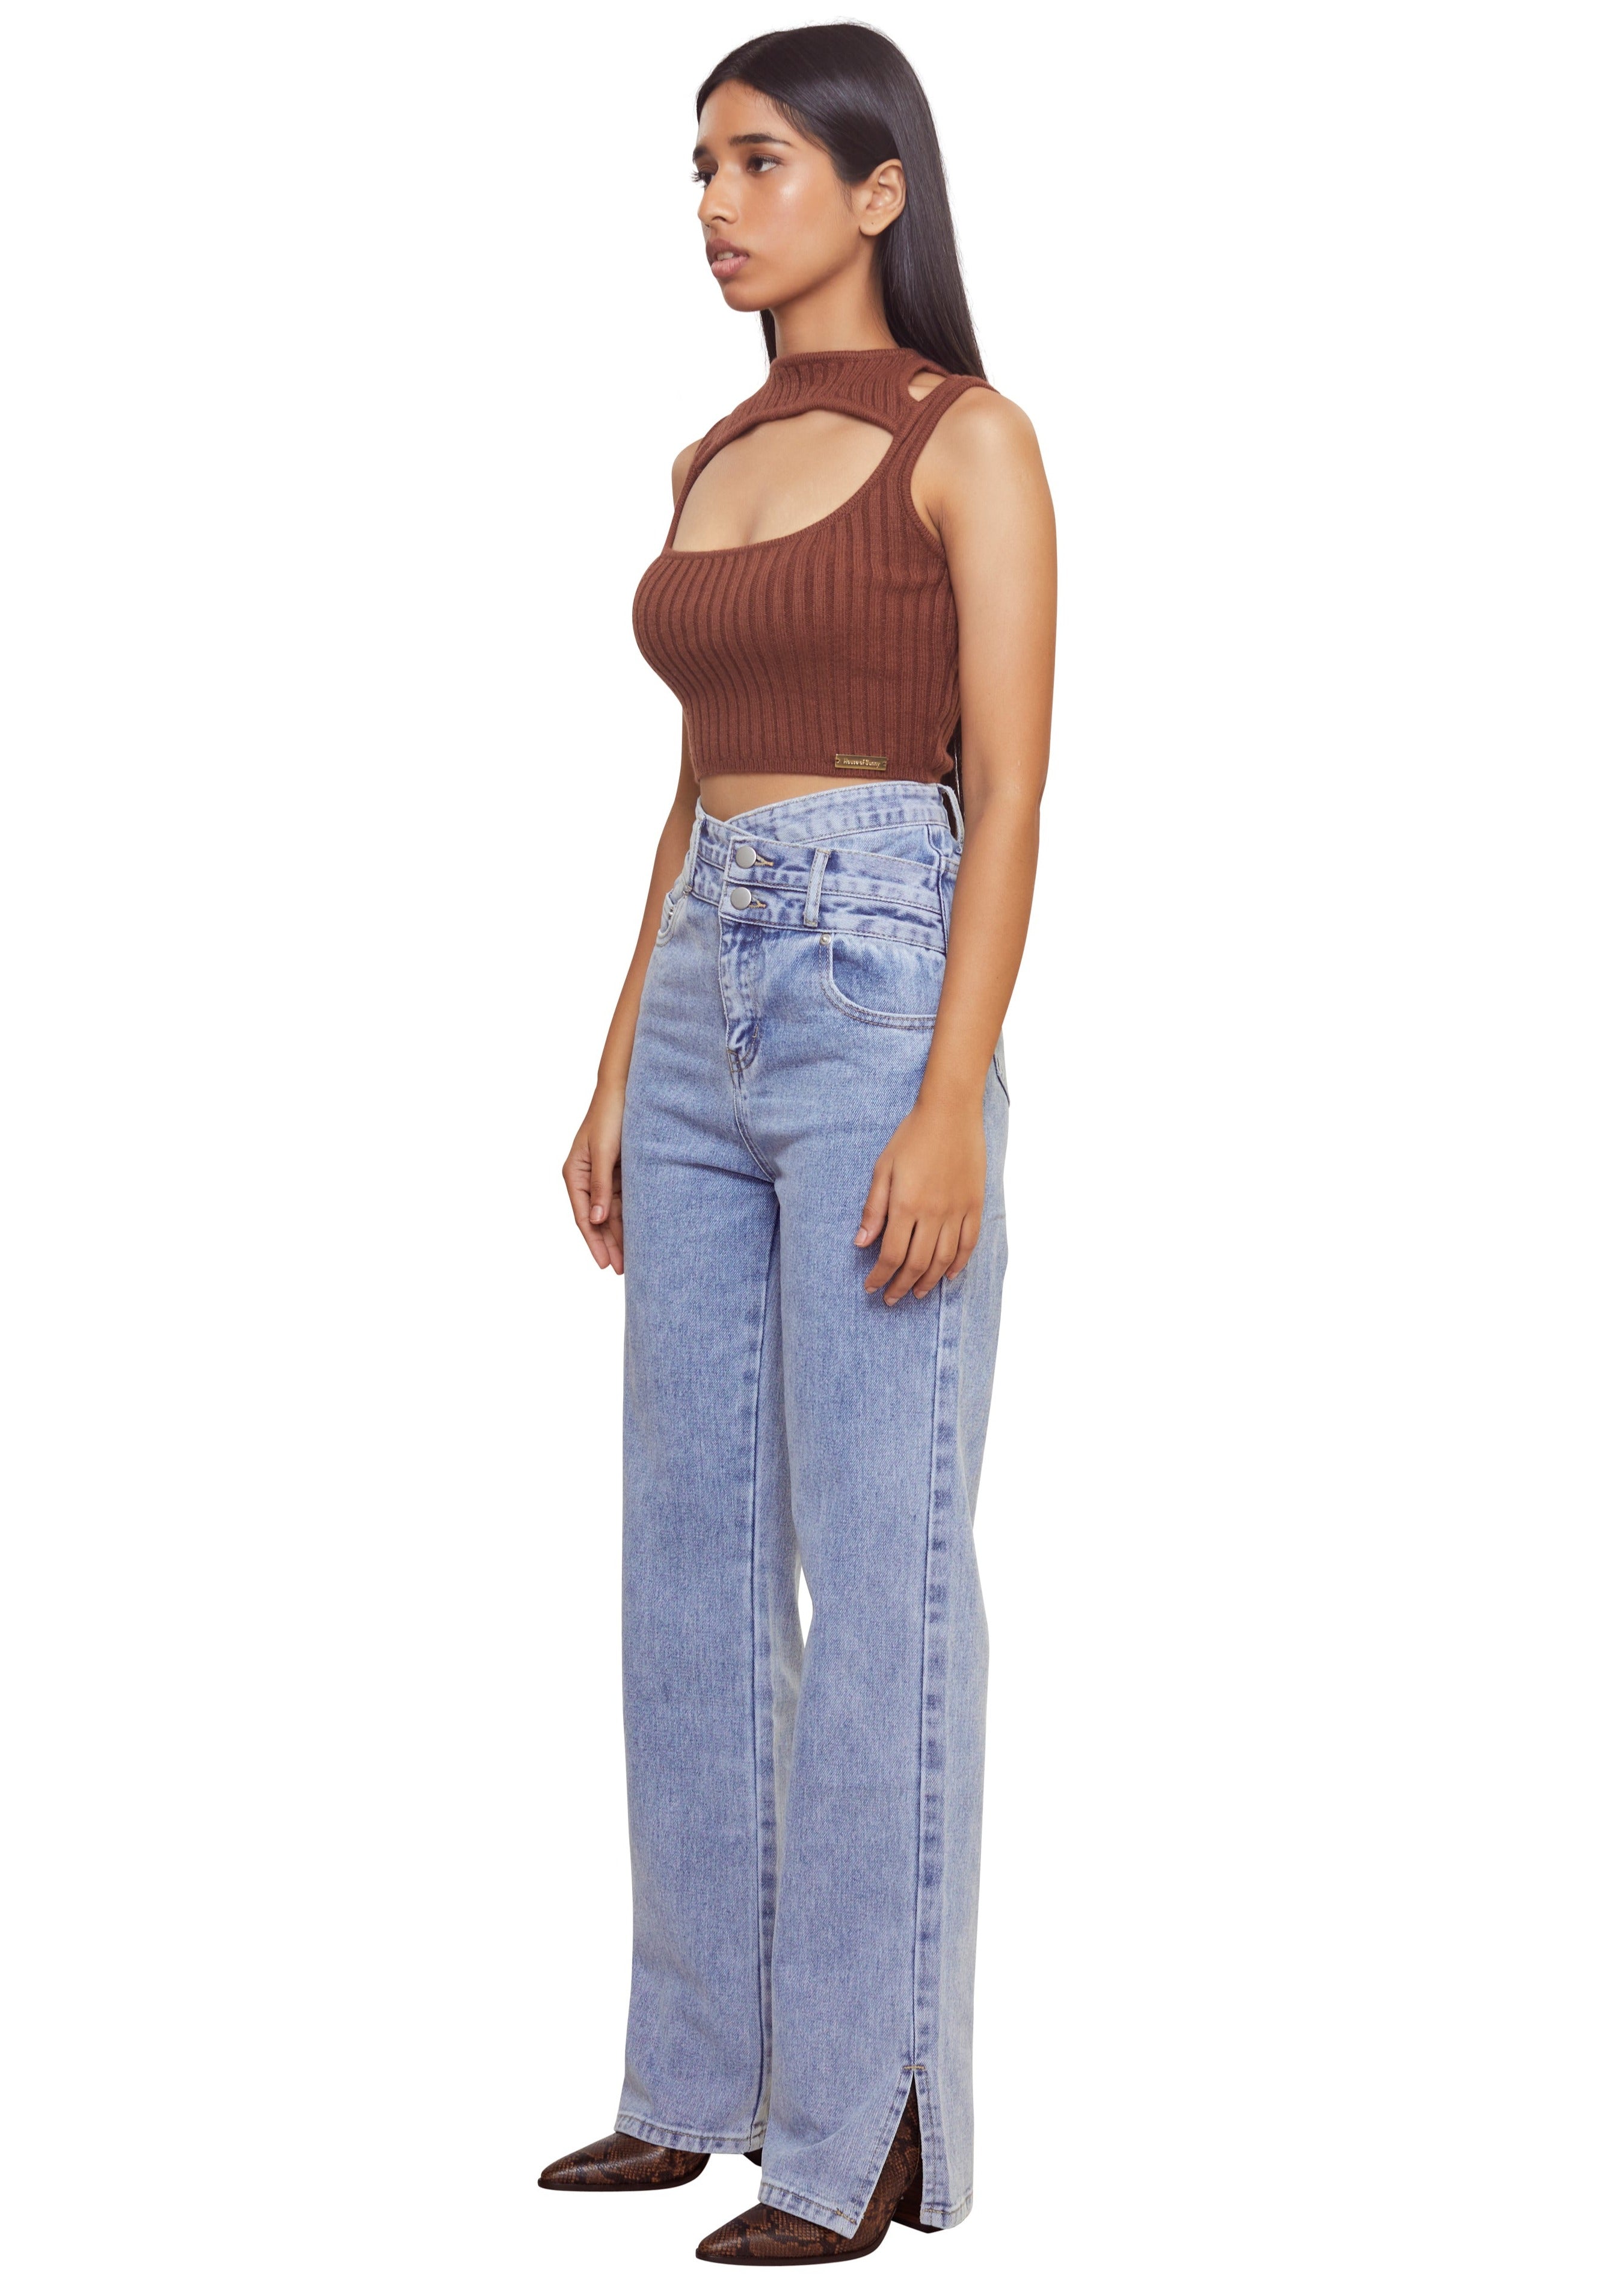 Brown Ripped crop top with double strap from the brand House of Sunny